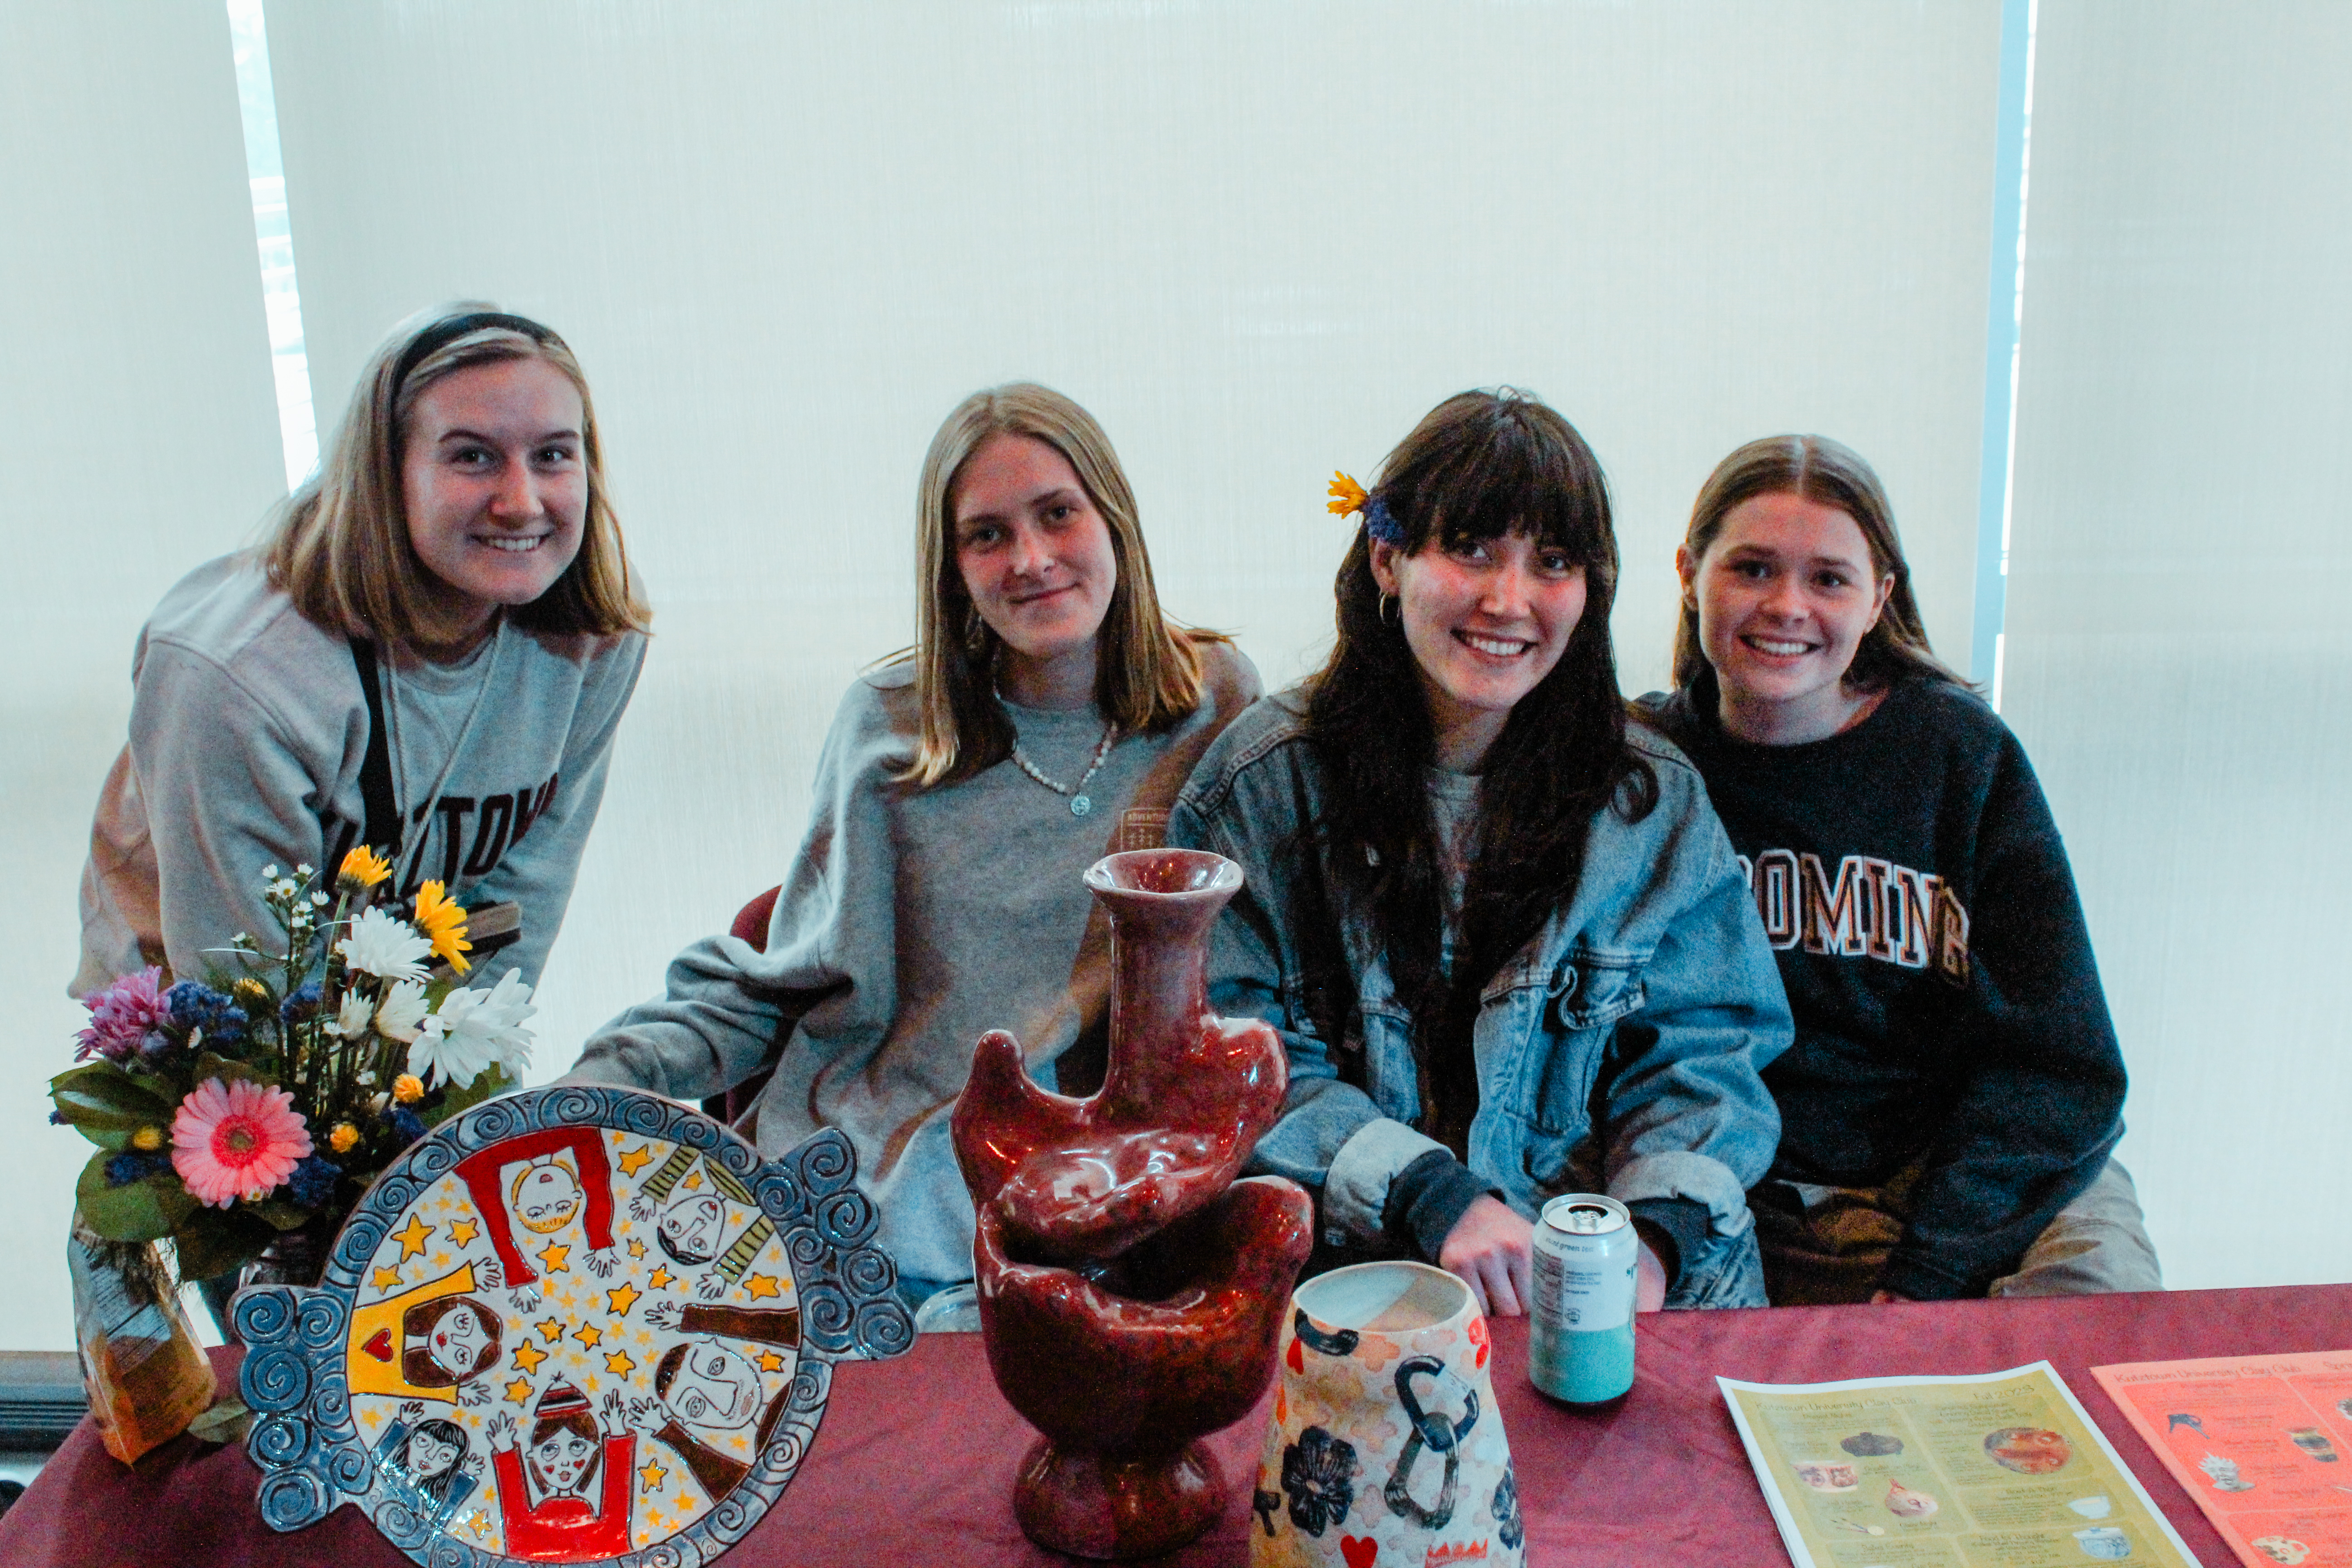 Students sitting at Table with pottery